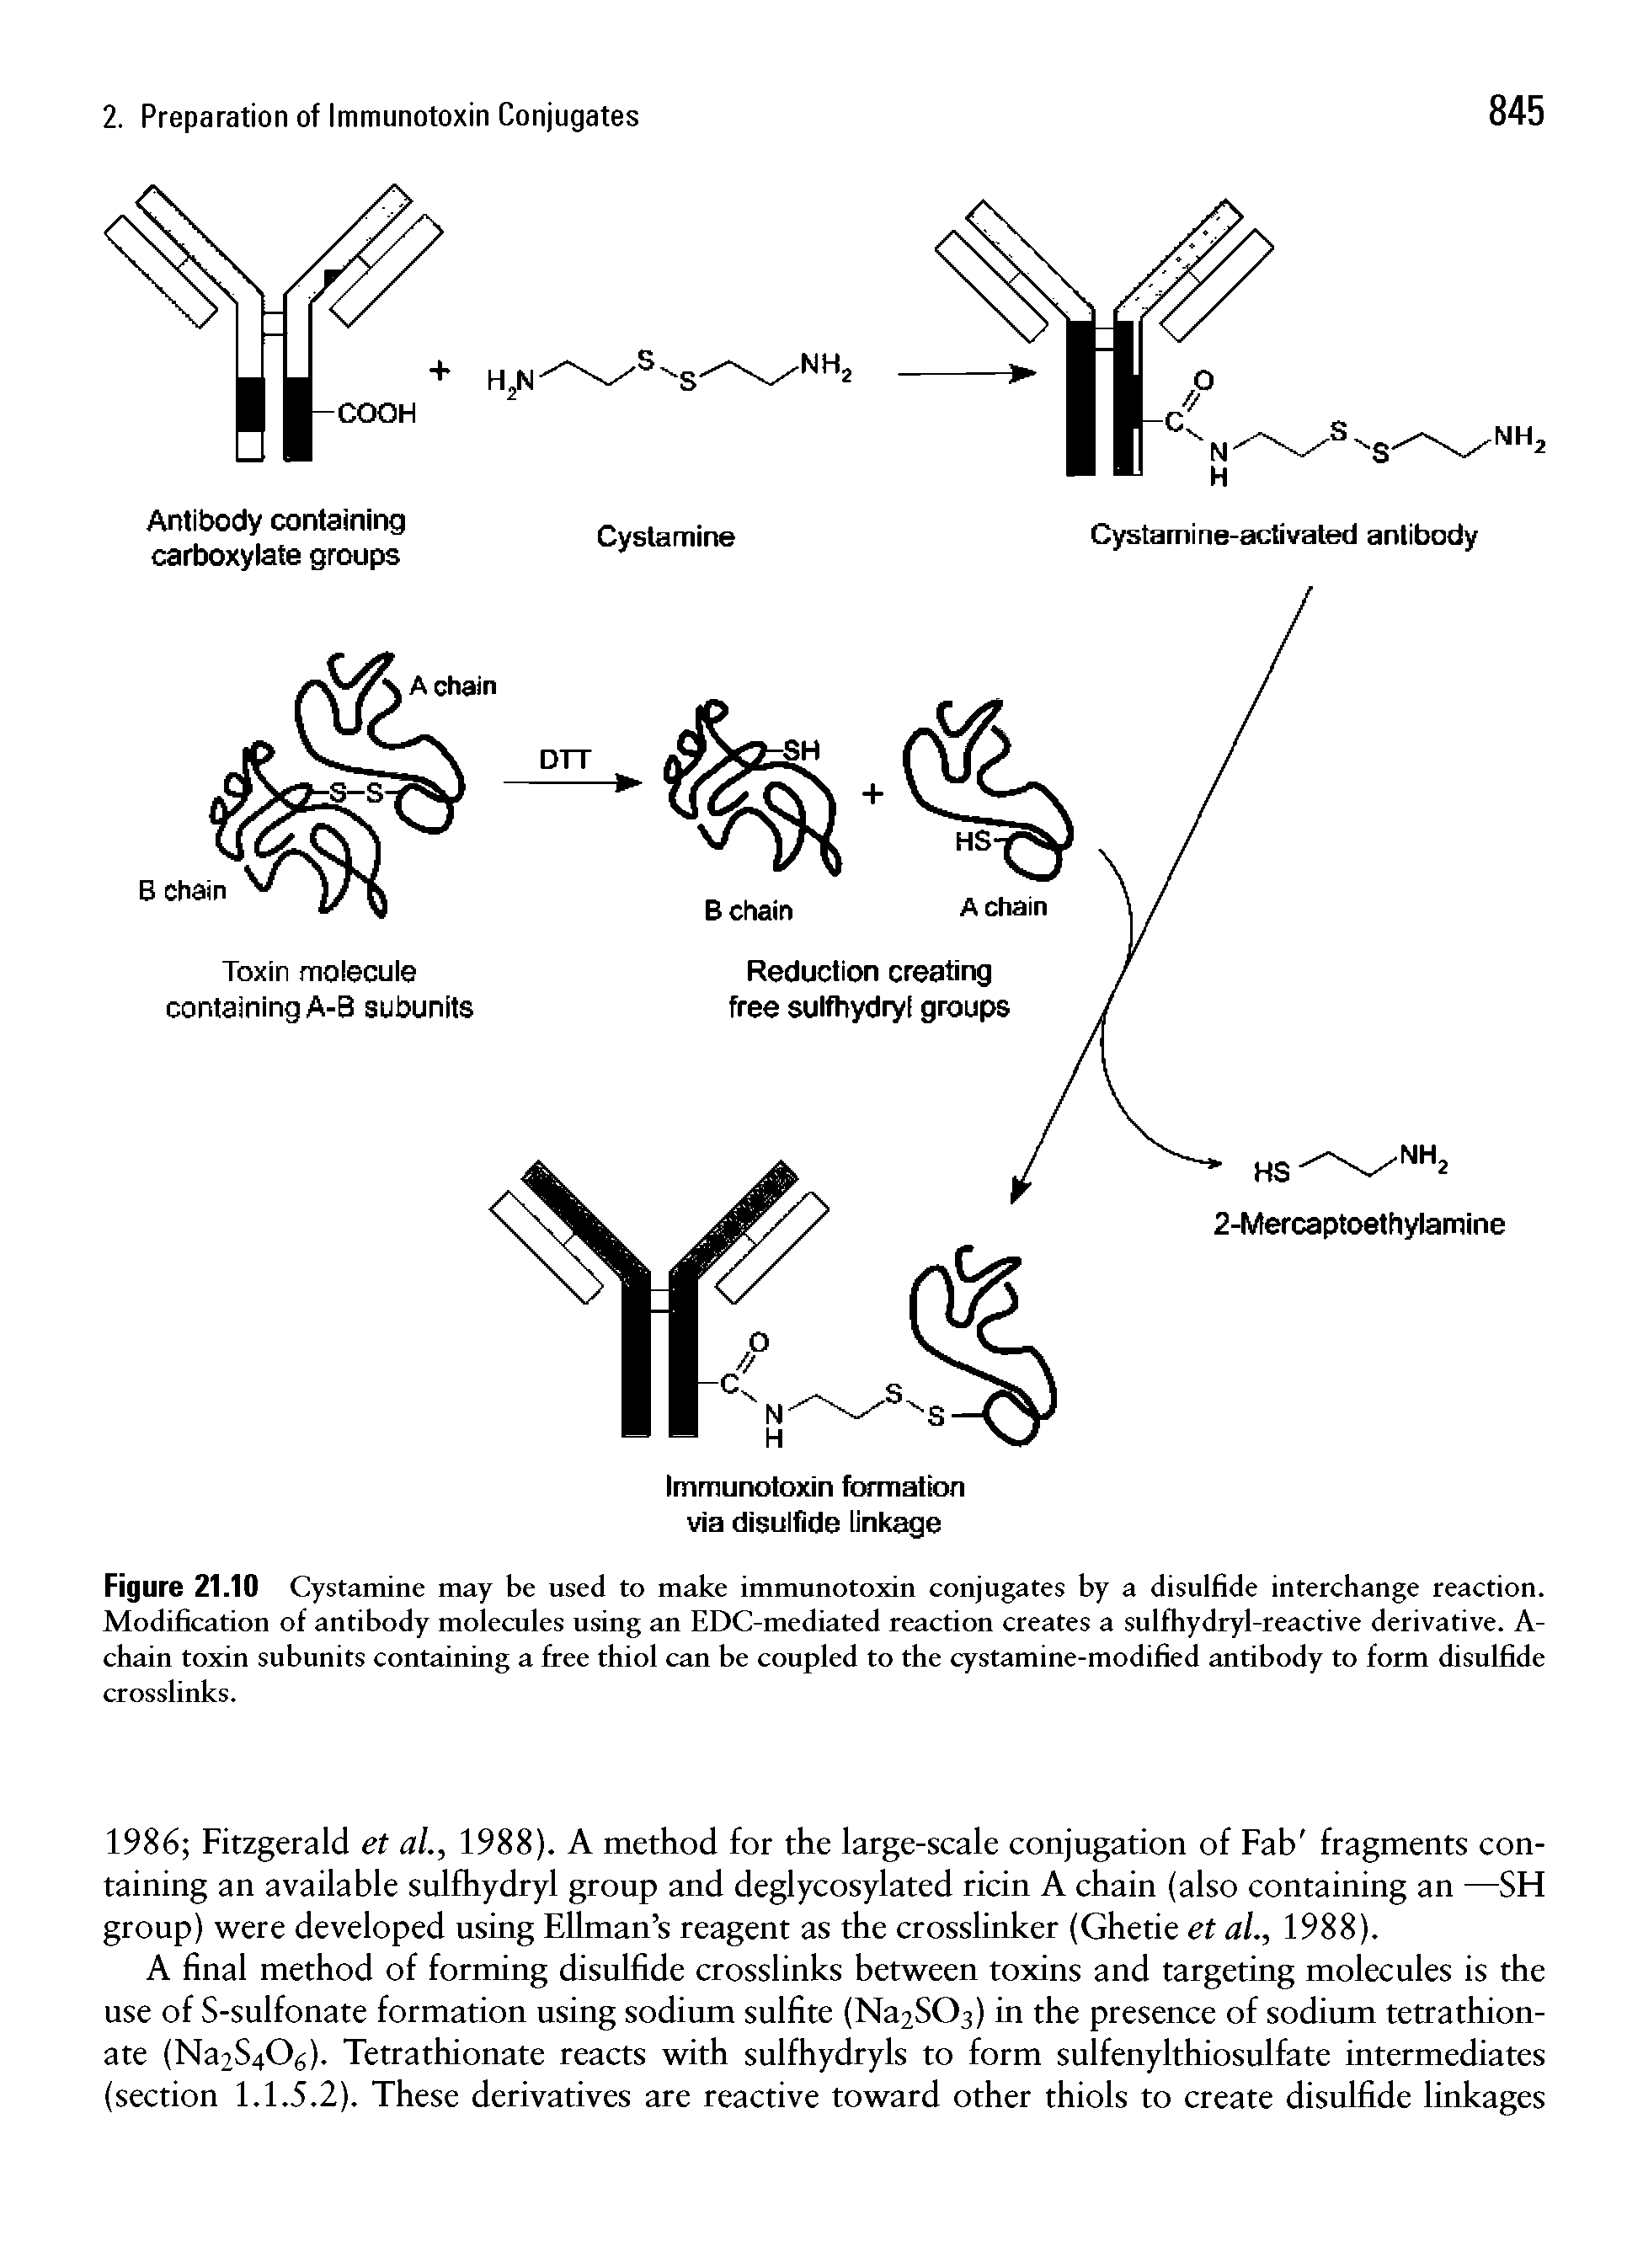 Figure 21.10 Cystamine may be used to make immunotoxin conjugates by a disulfide interchange reaction. Modification of antibody molecules using an EDC-mediated reaction creates a sulfhydryl-reactive derivative. A-chain toxin subunits containing a free thiol can be coupled to the cystamine-modified antibody to form disulfide crosslinks.